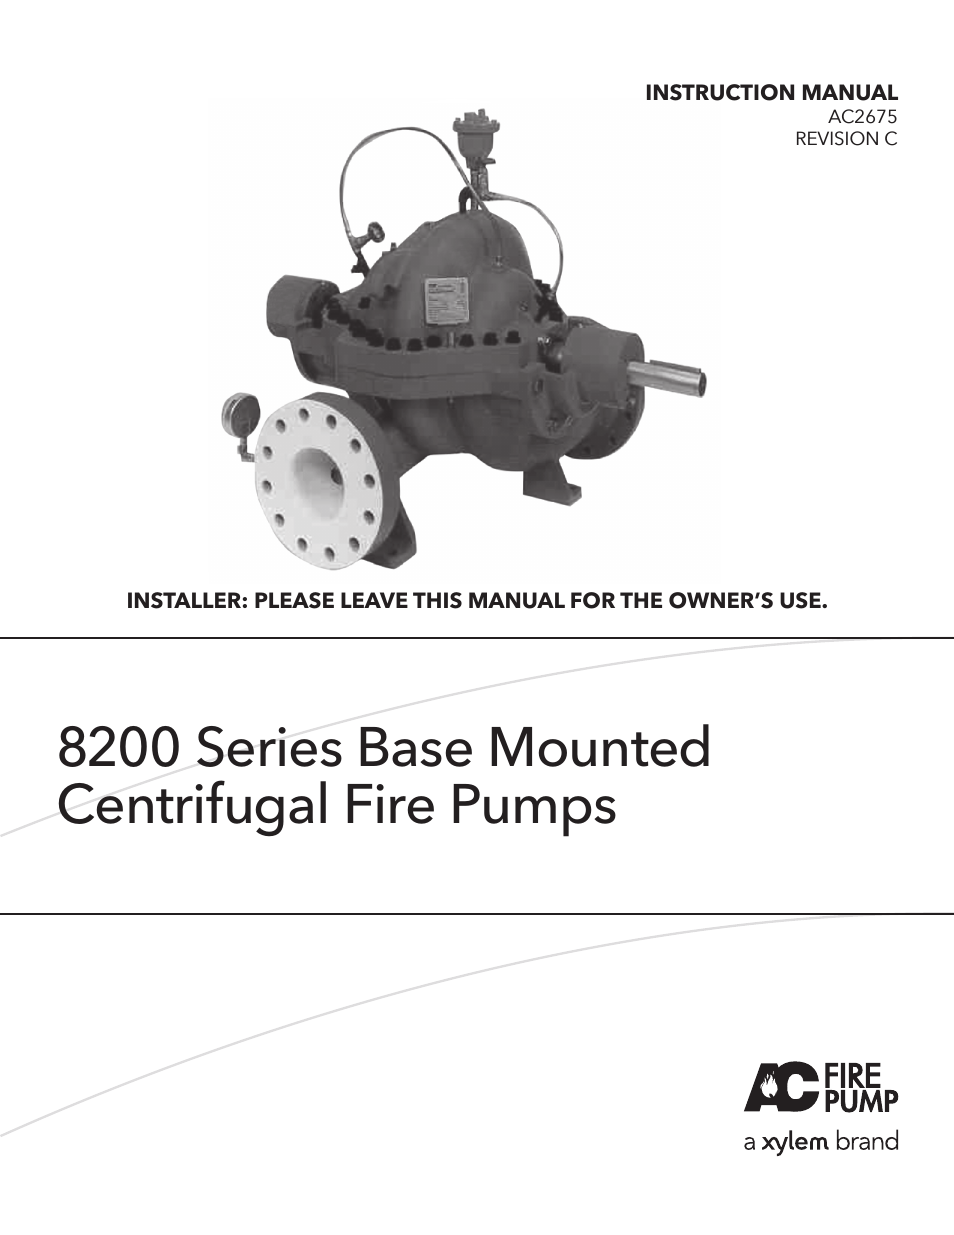 8200 Series Base Mounted Centrifugal Fire Pumps AC2675 REV.C